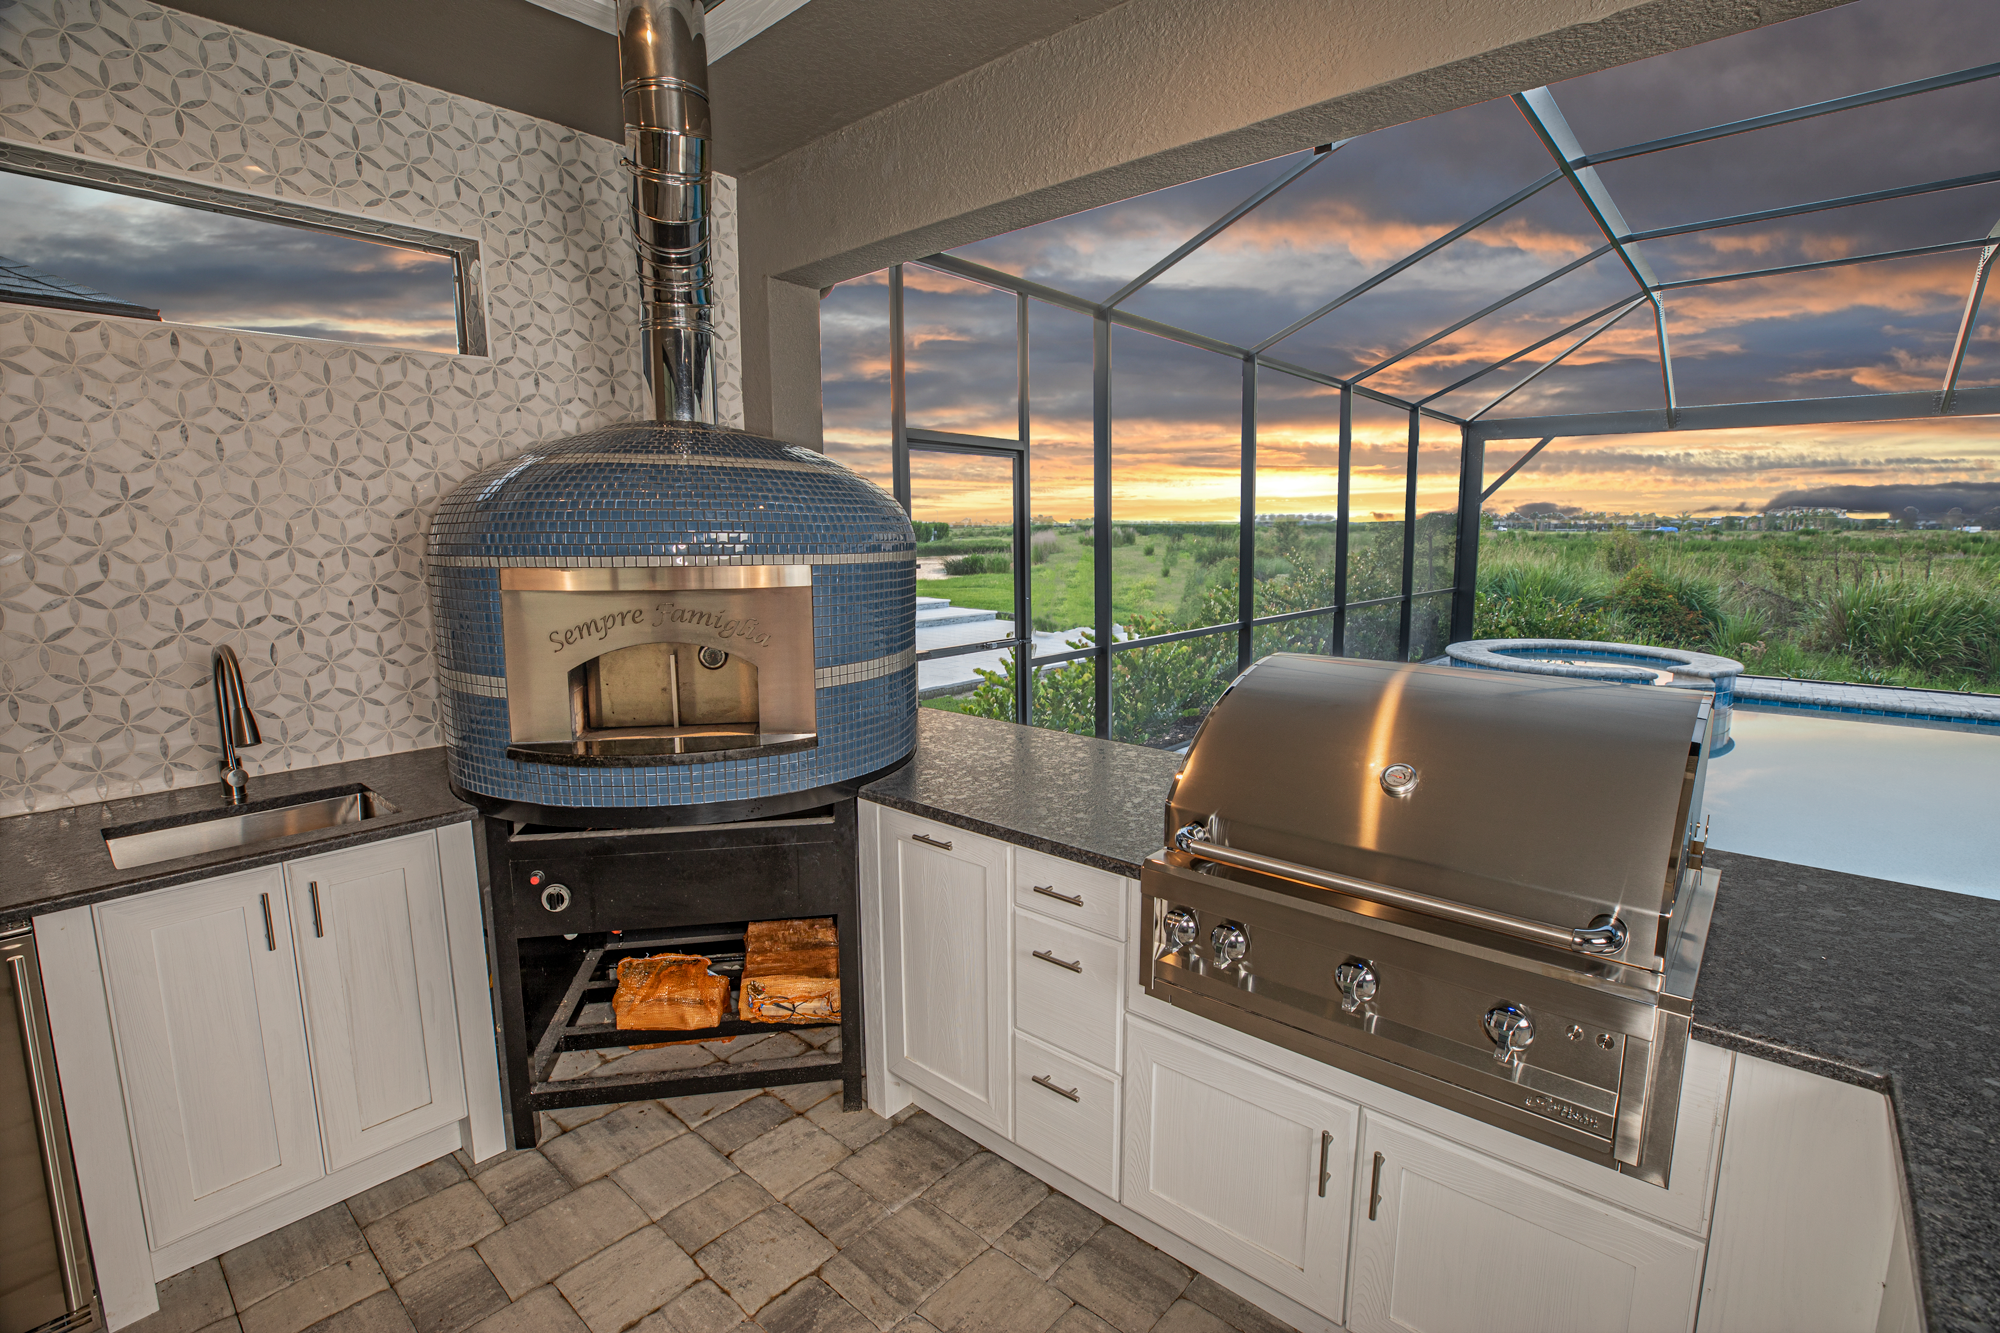 How to Design an Outdoor Kitchen with a Pizza Oven